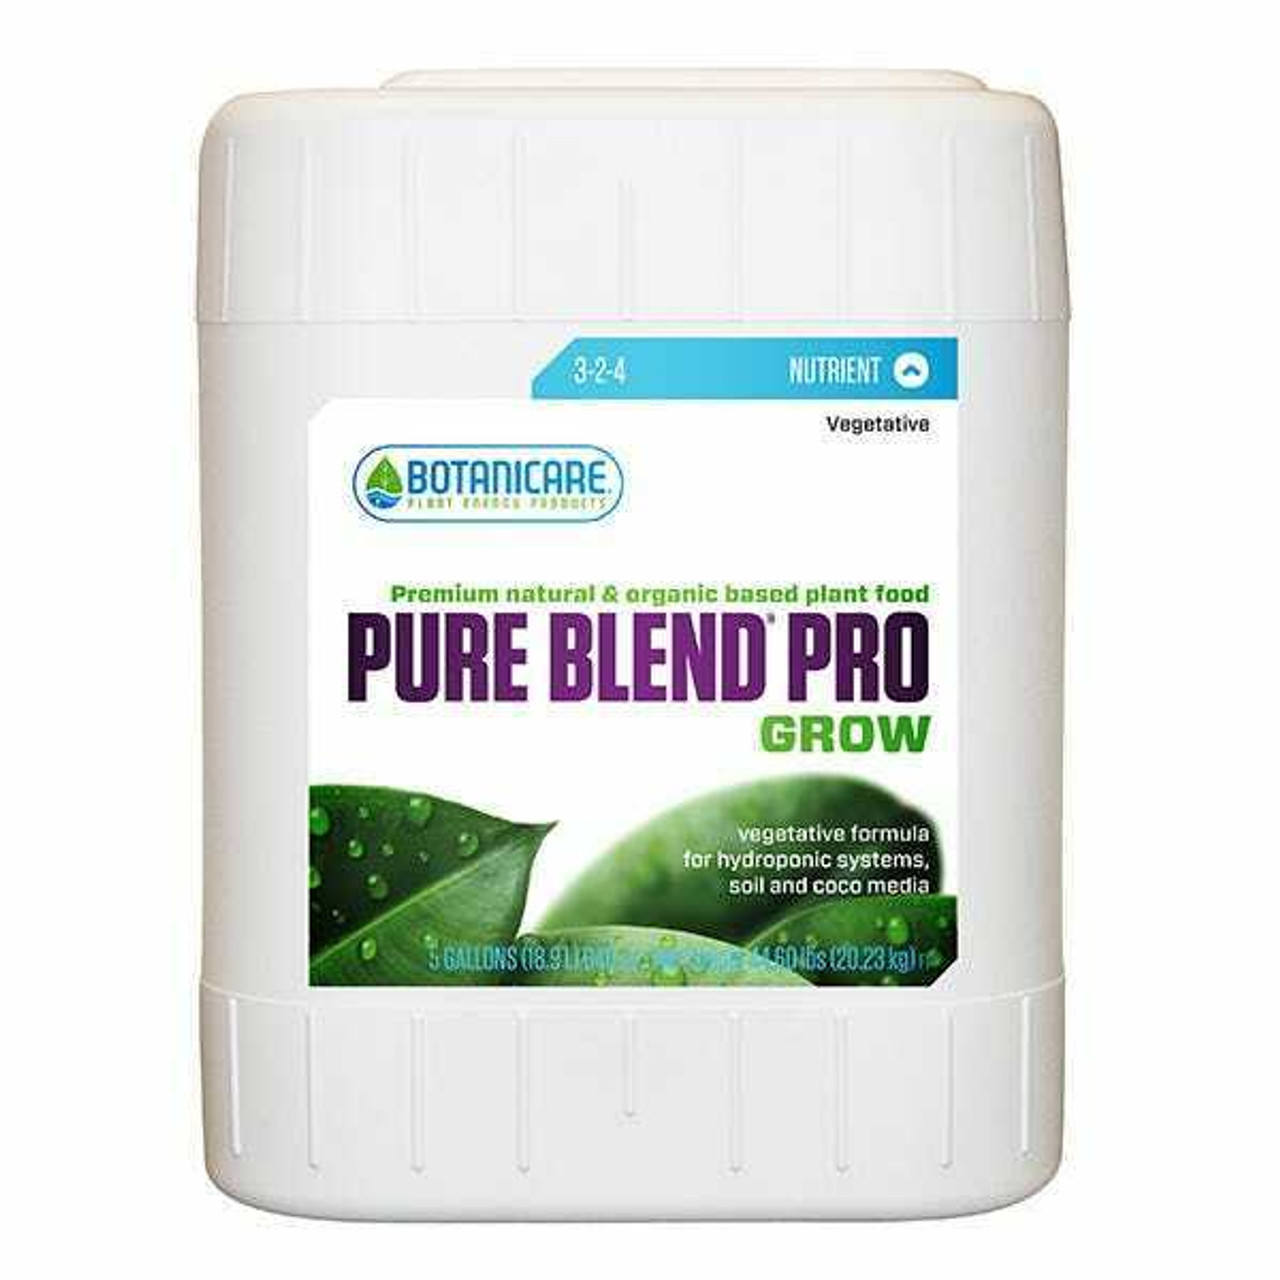 Botanicare Pure Blend Pro Grow 5 Gallon (Freight/In-Store Pickup Only) - 1